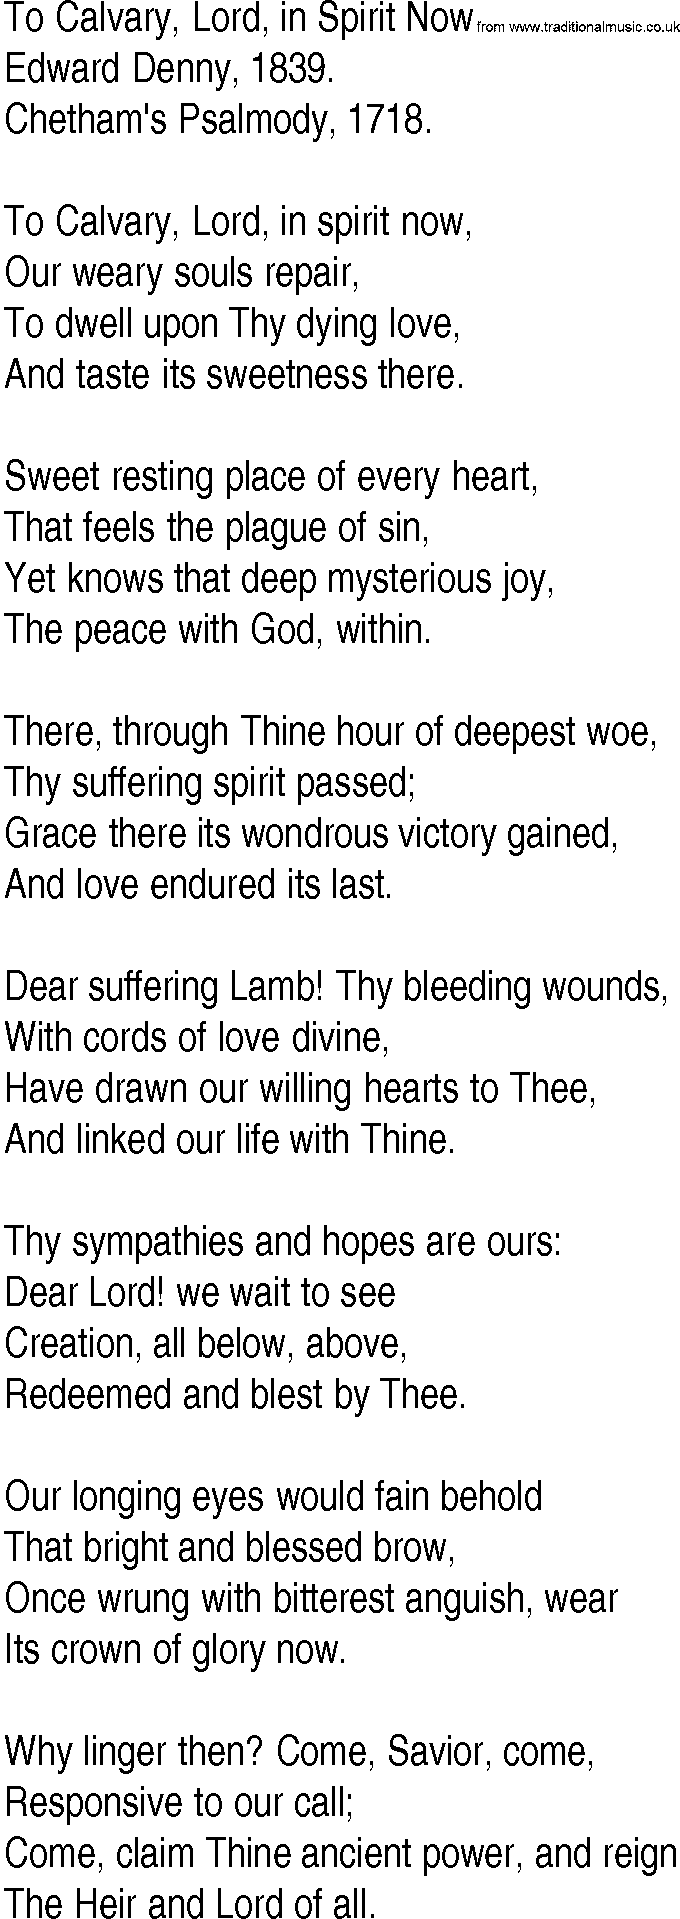 Hymn and Gospel Song: To Calvary, Lord, in Spirit Now by Edward Denny lyrics